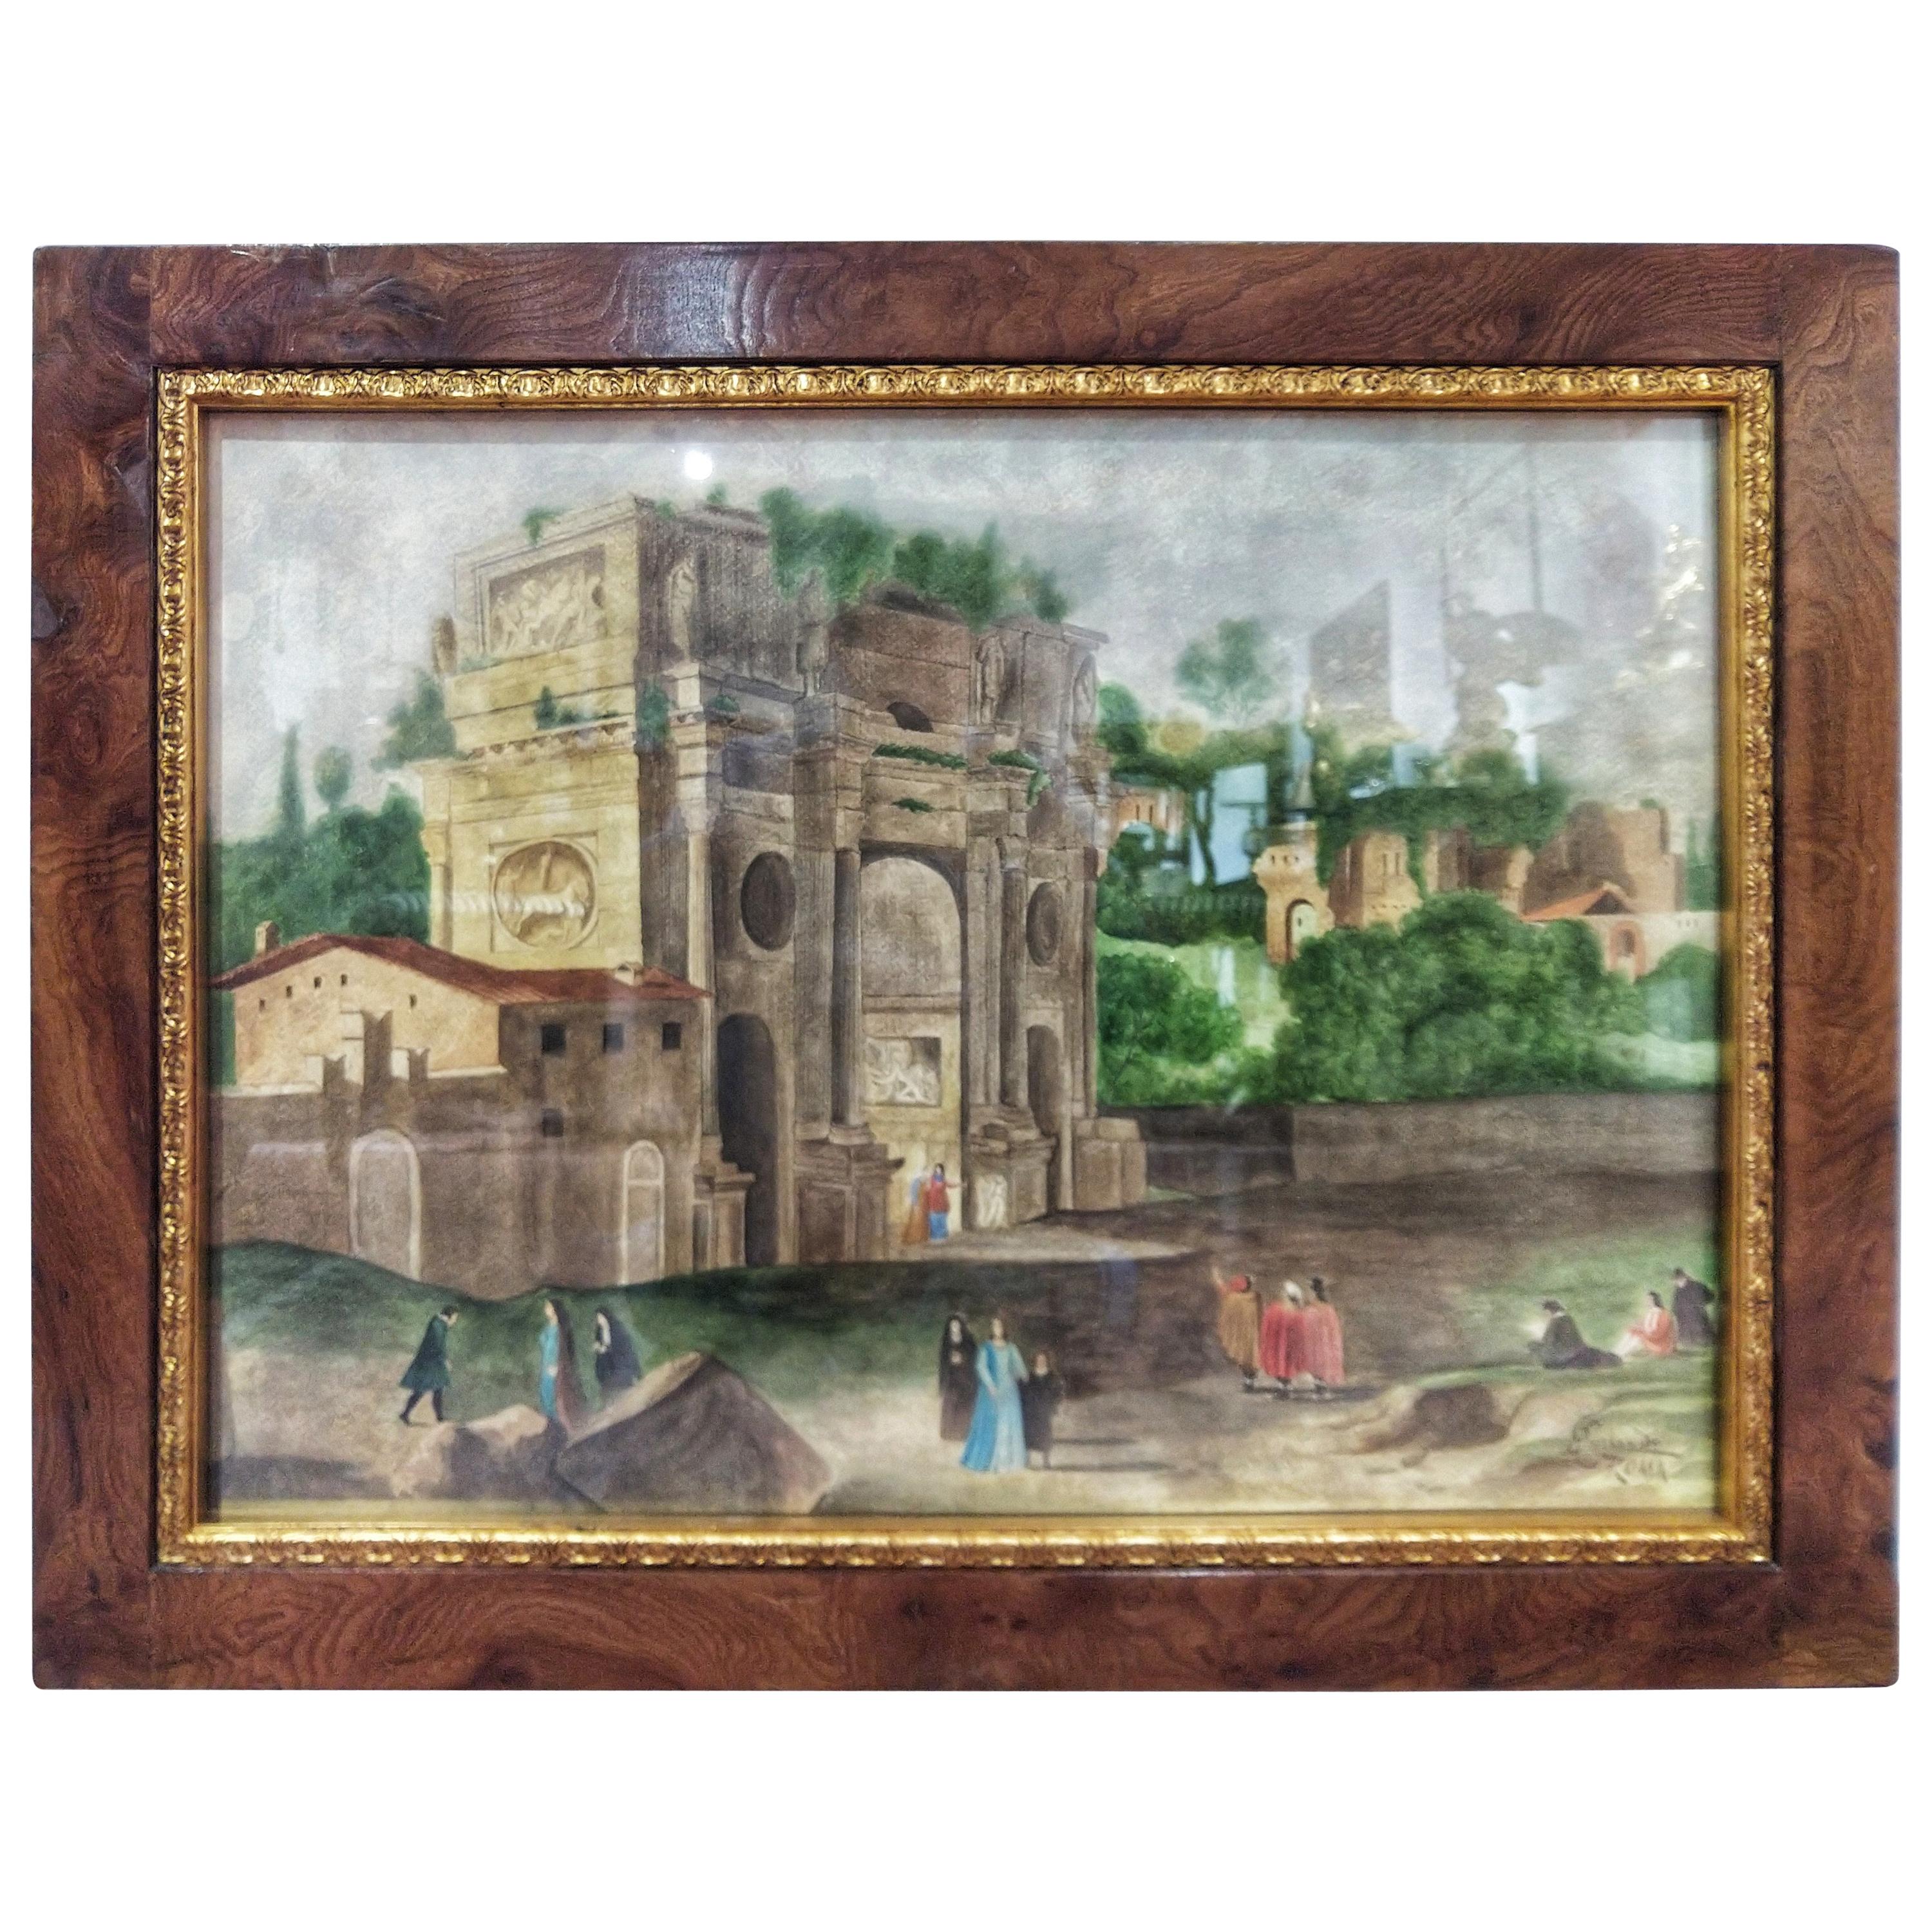 Late 19th Century Watercolor Landscape Arch Imperial Forums in Rome Signed